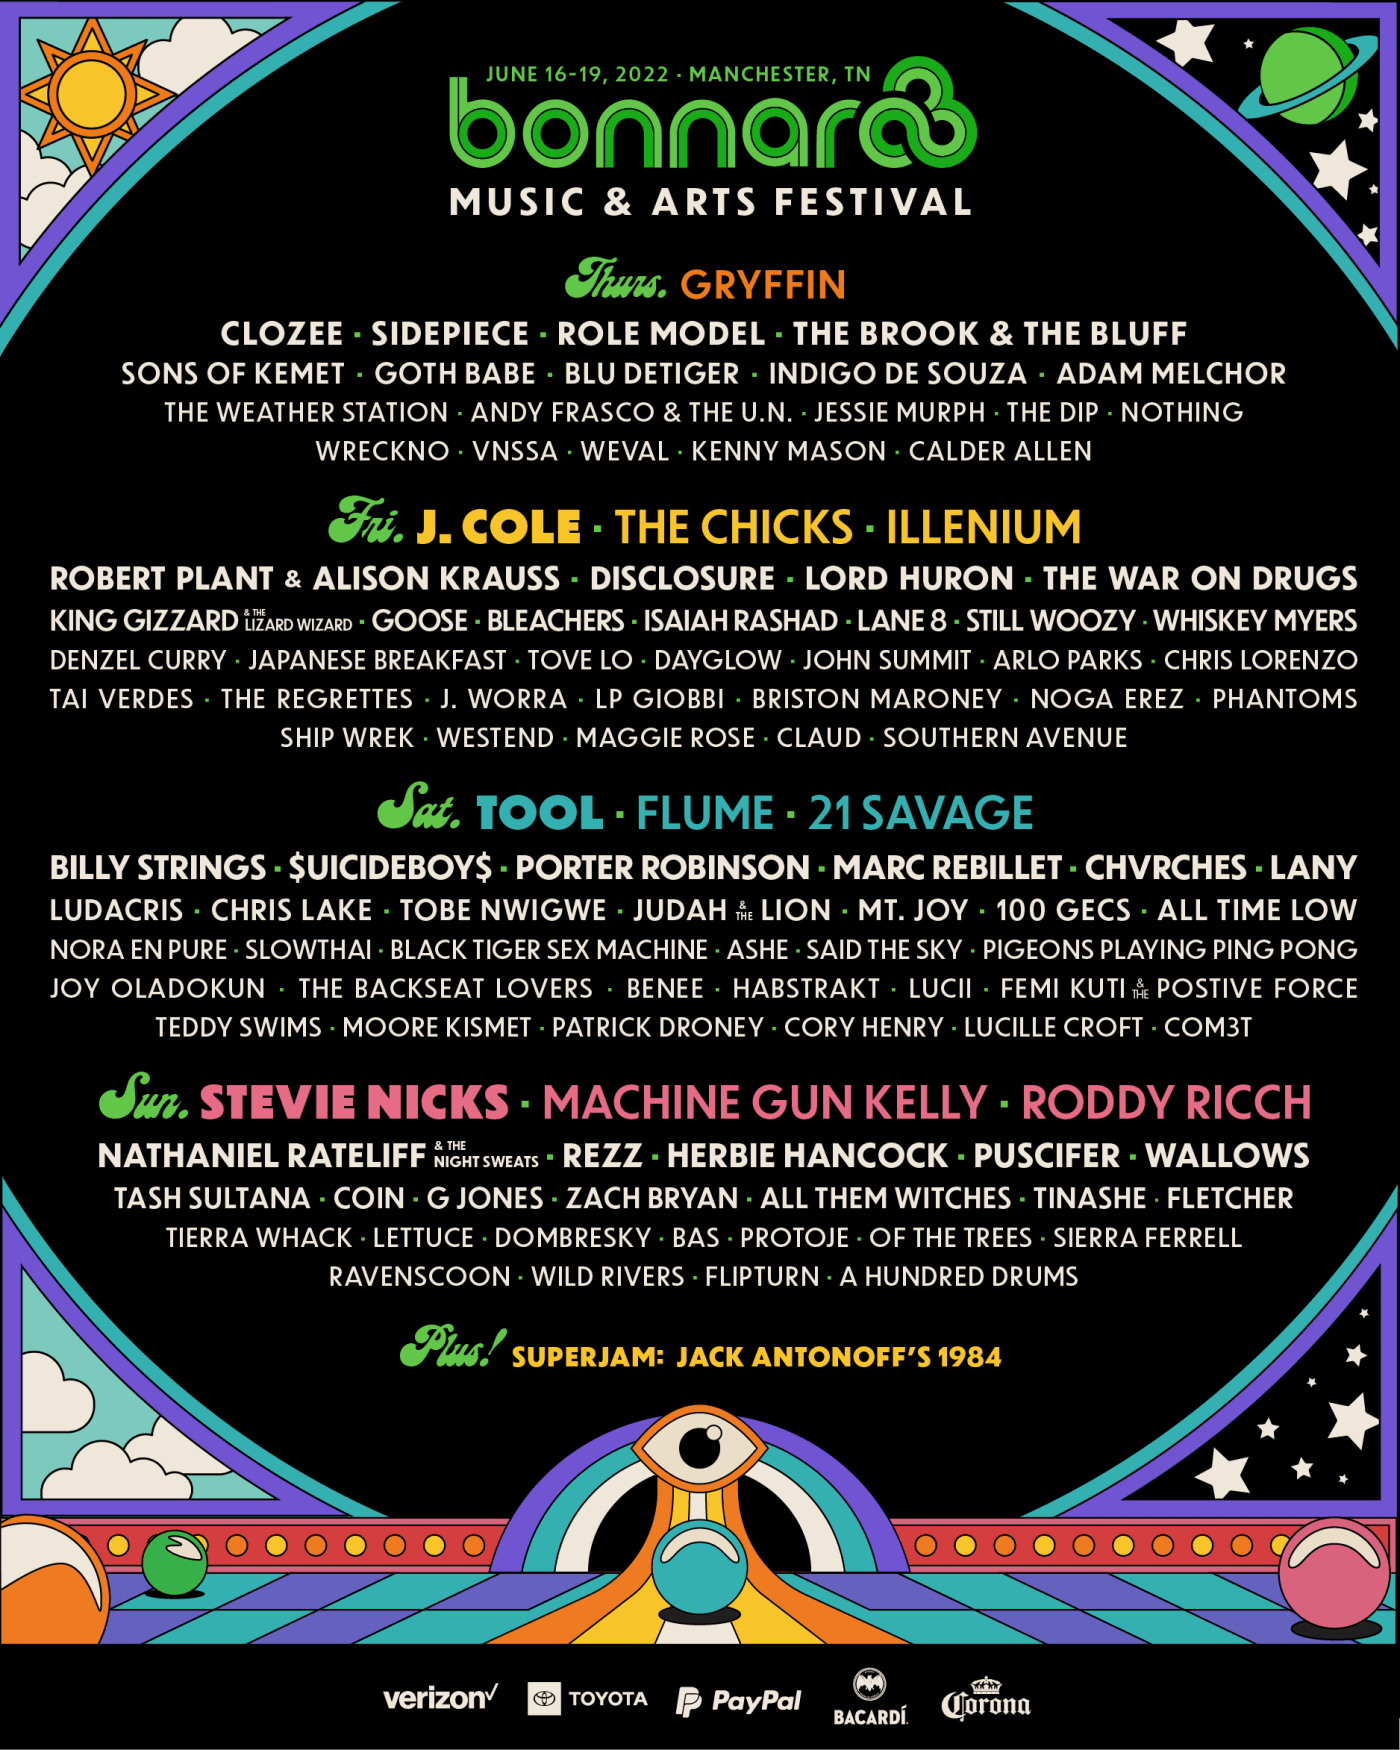 A flyer for the 2022 Bonnaroo festival is shown